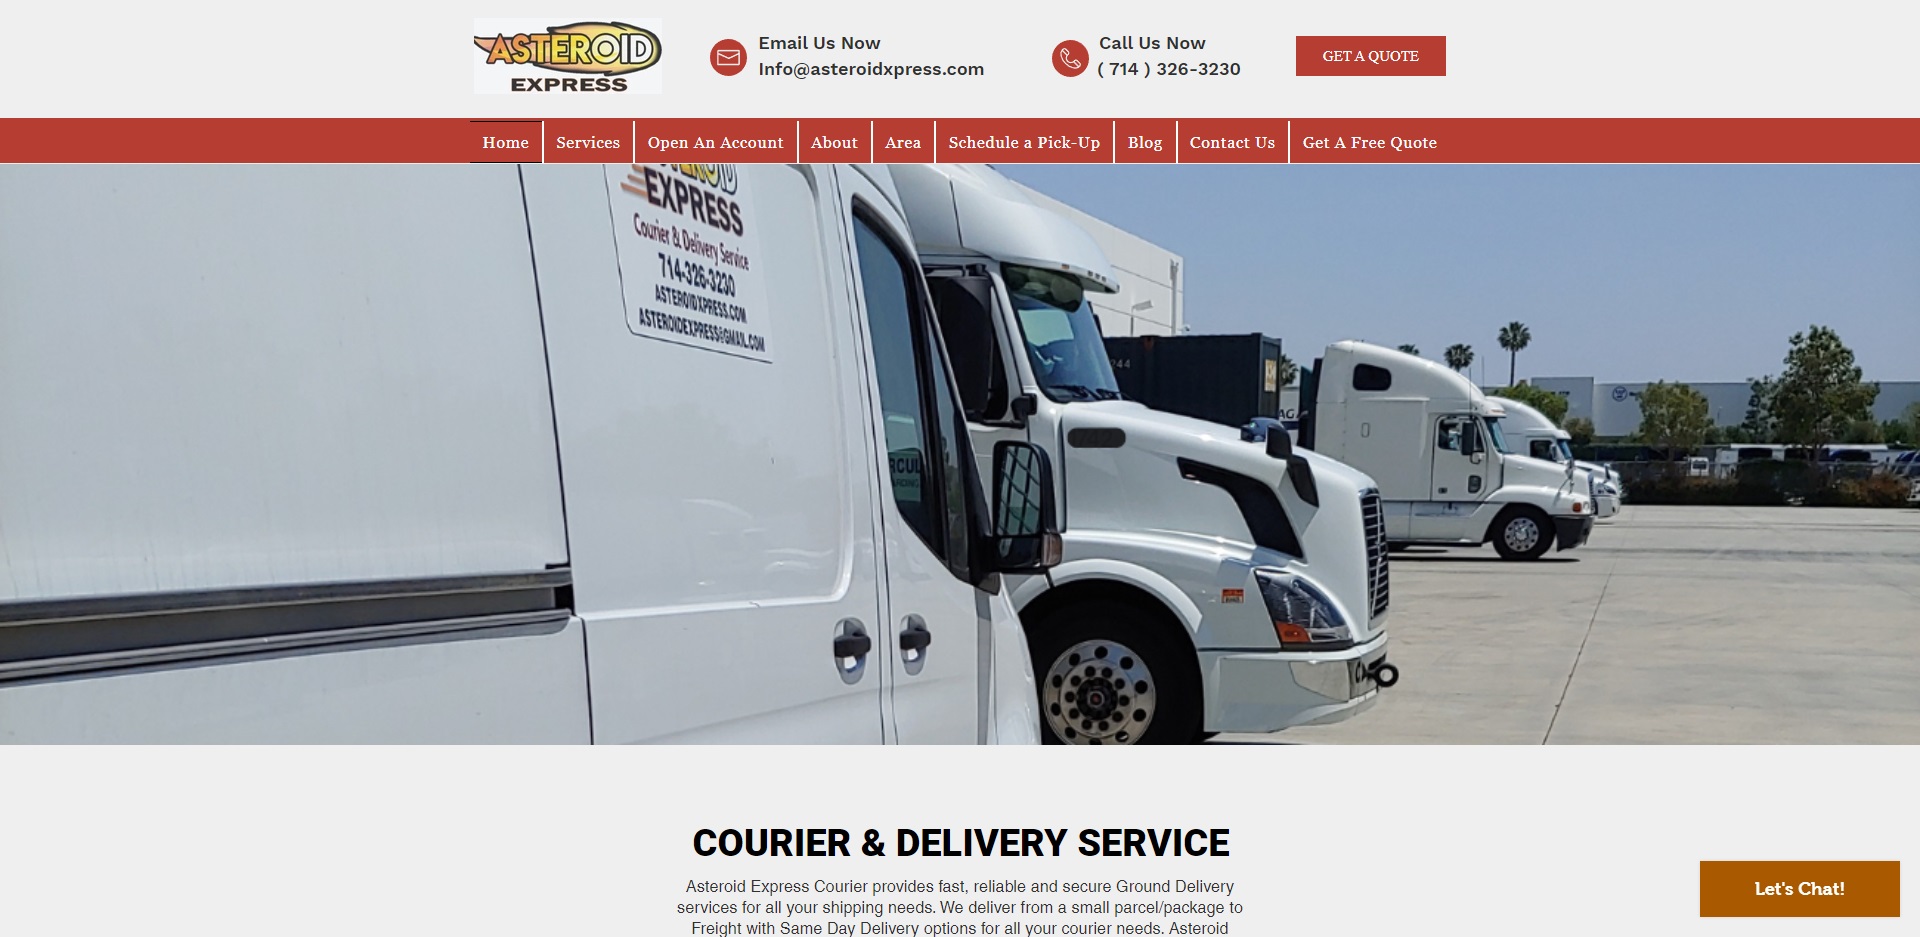 The Best Couriers in Anaheim, CA